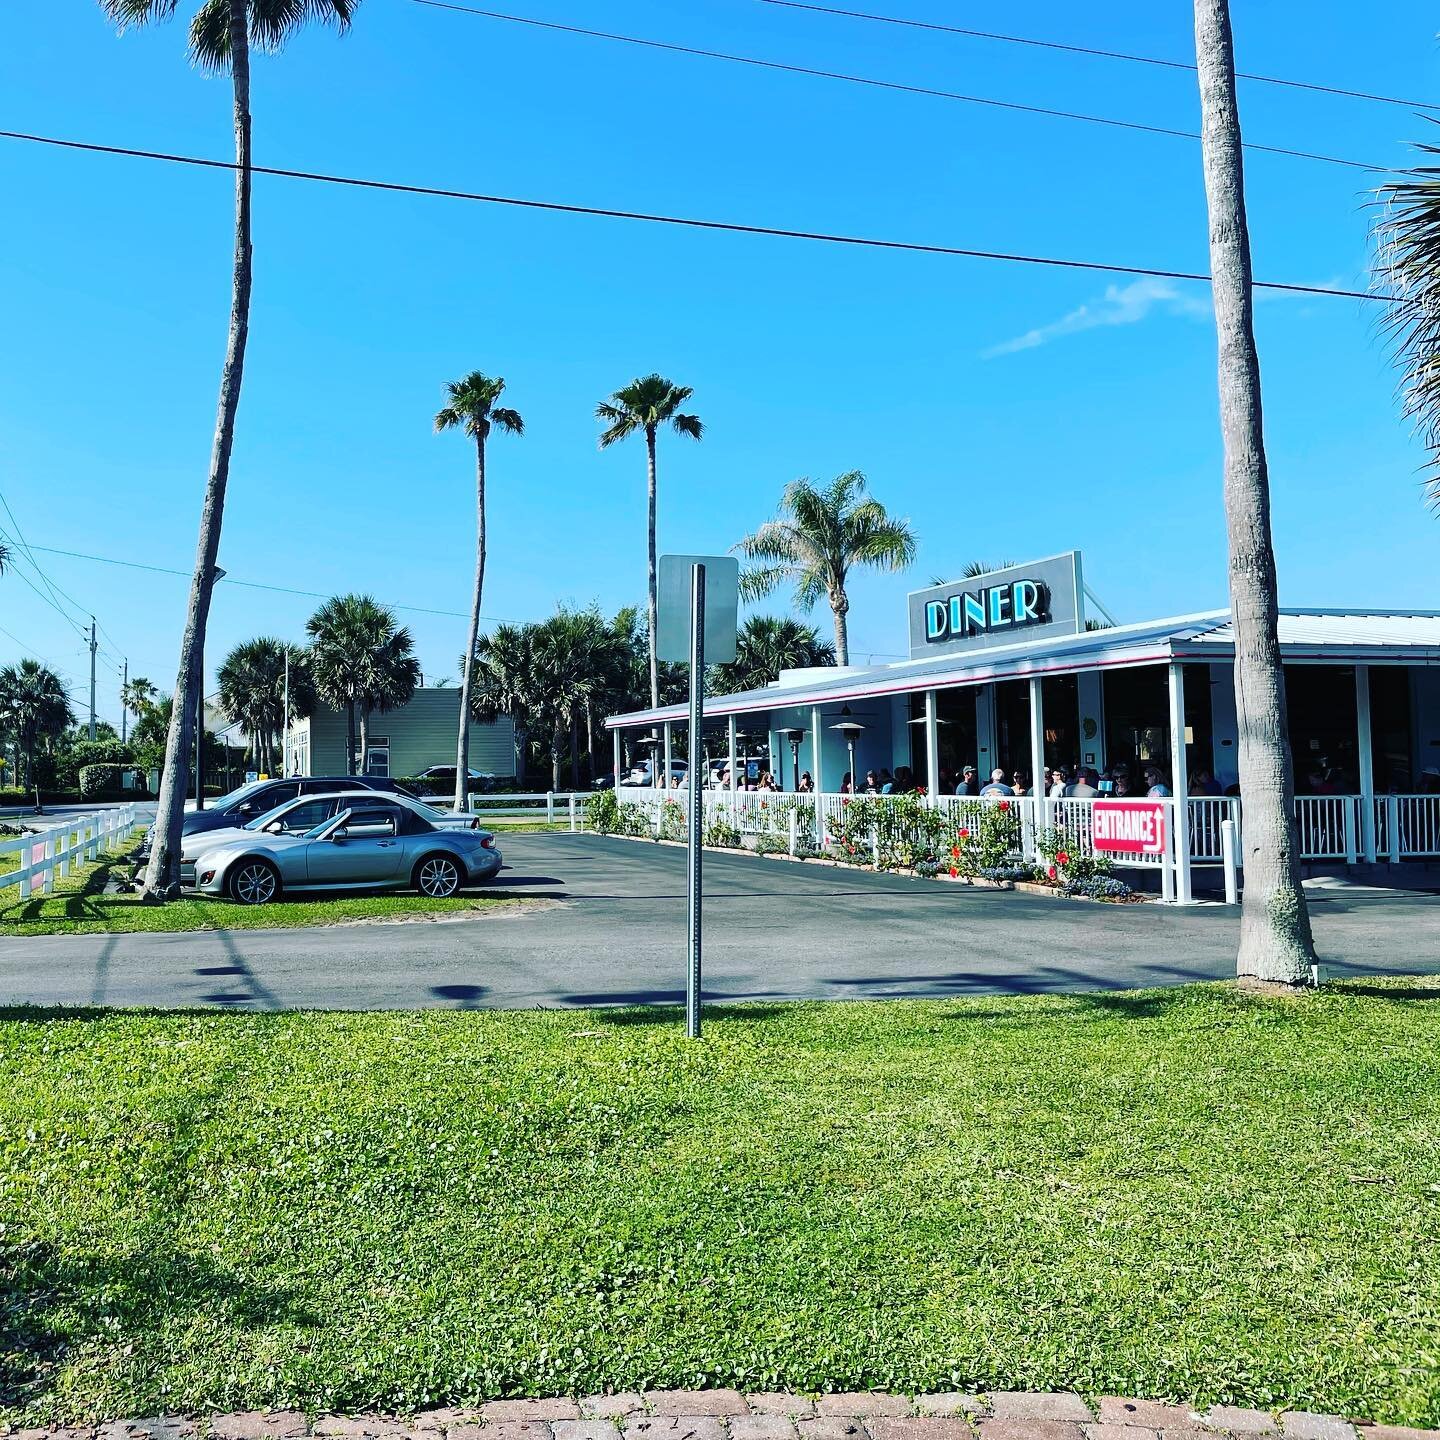 Breakfast by the beach. @a1abeachsidediner really hits the spot as you prep for a day in sun. 😎 Grab a delicious plate of food and mimosas then hop right across the street to the public pier! A perfect Florida day! ☀️